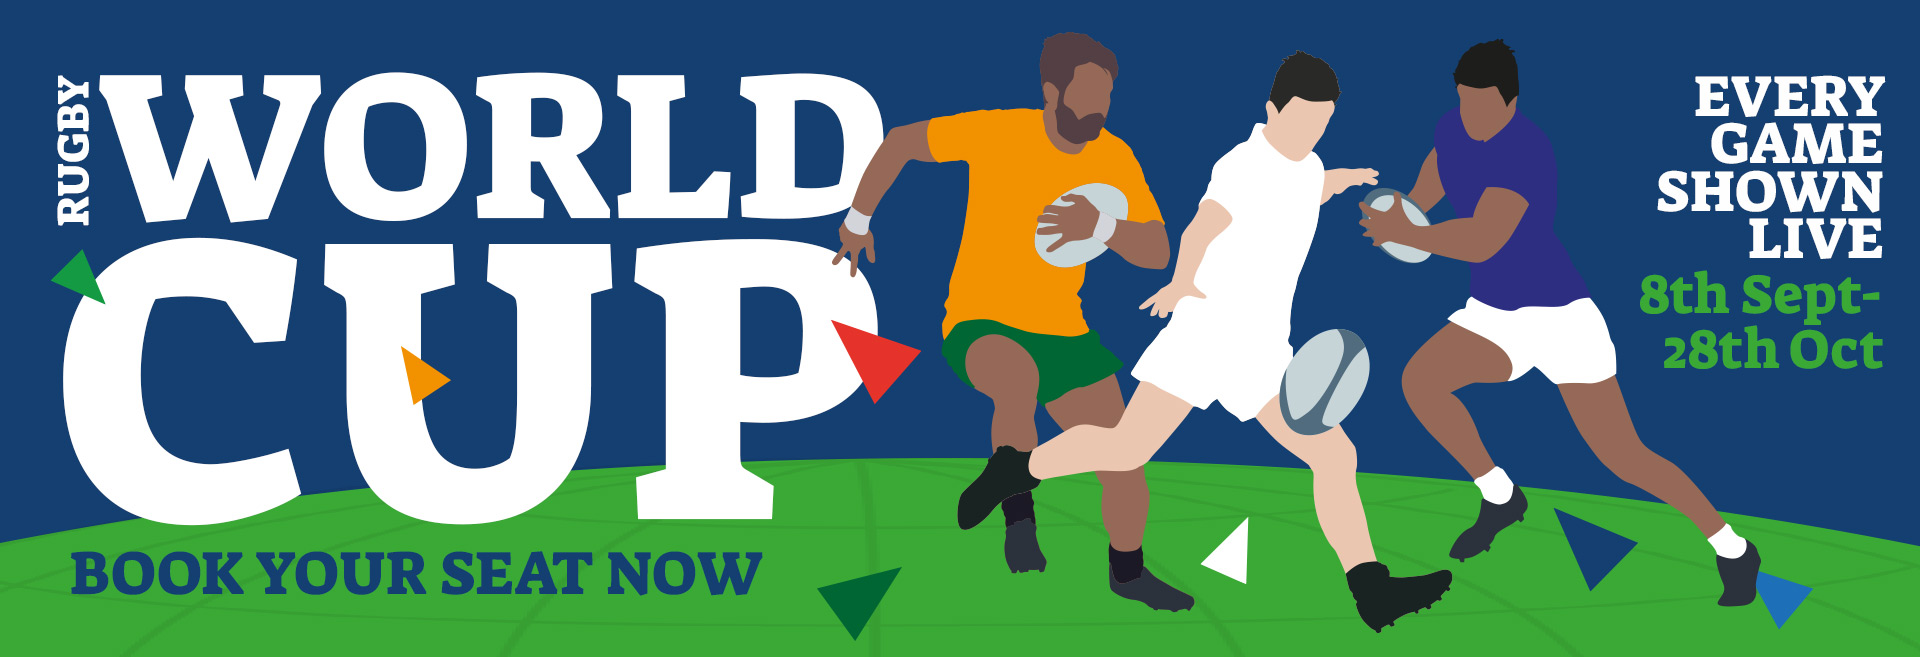 Watch the Rugby World Cup at The Green Man